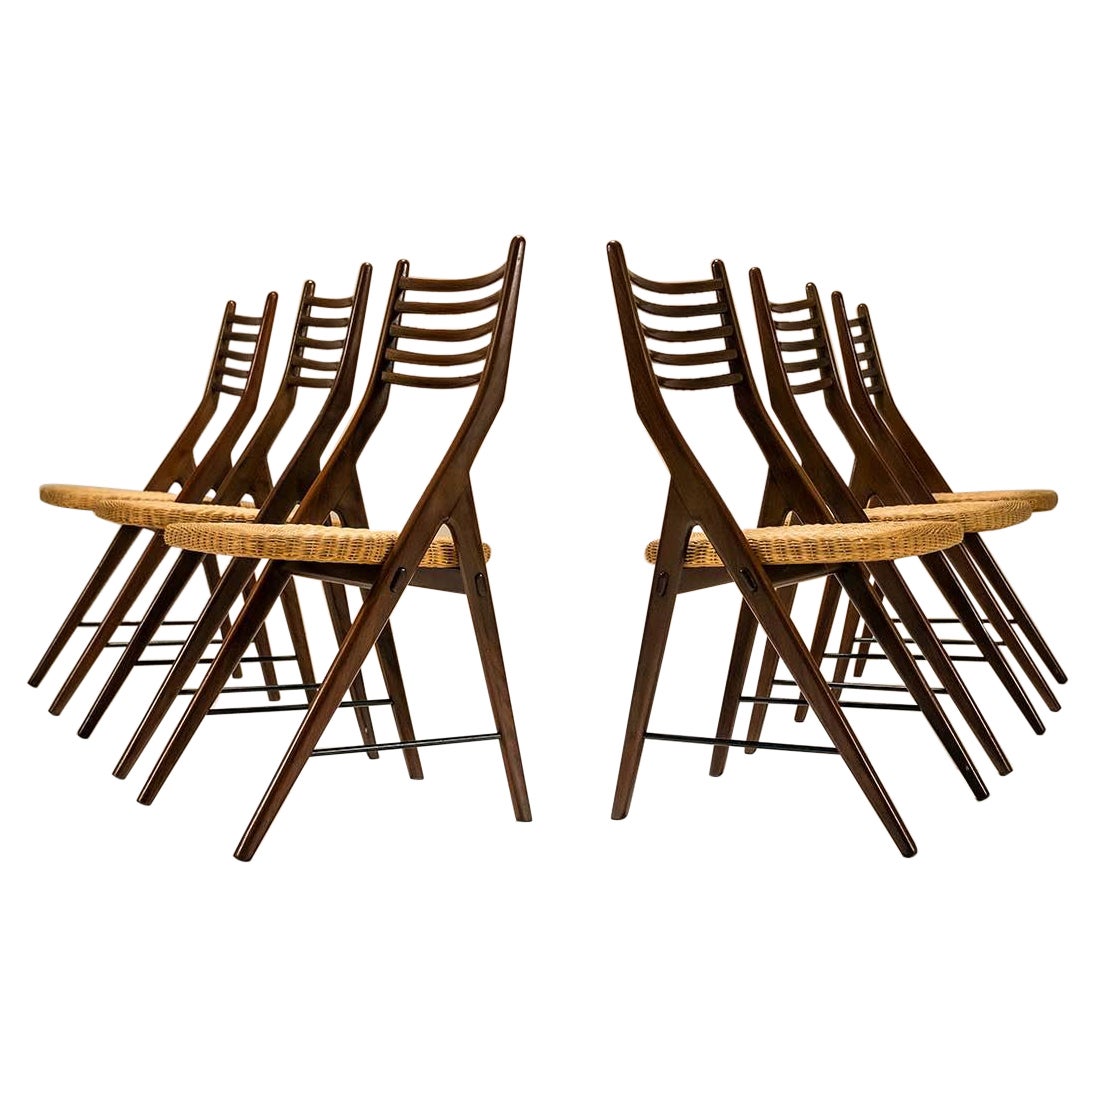 Set of Six Elegant Dining Chairs in Teak and Wicker, Italy, 1970s